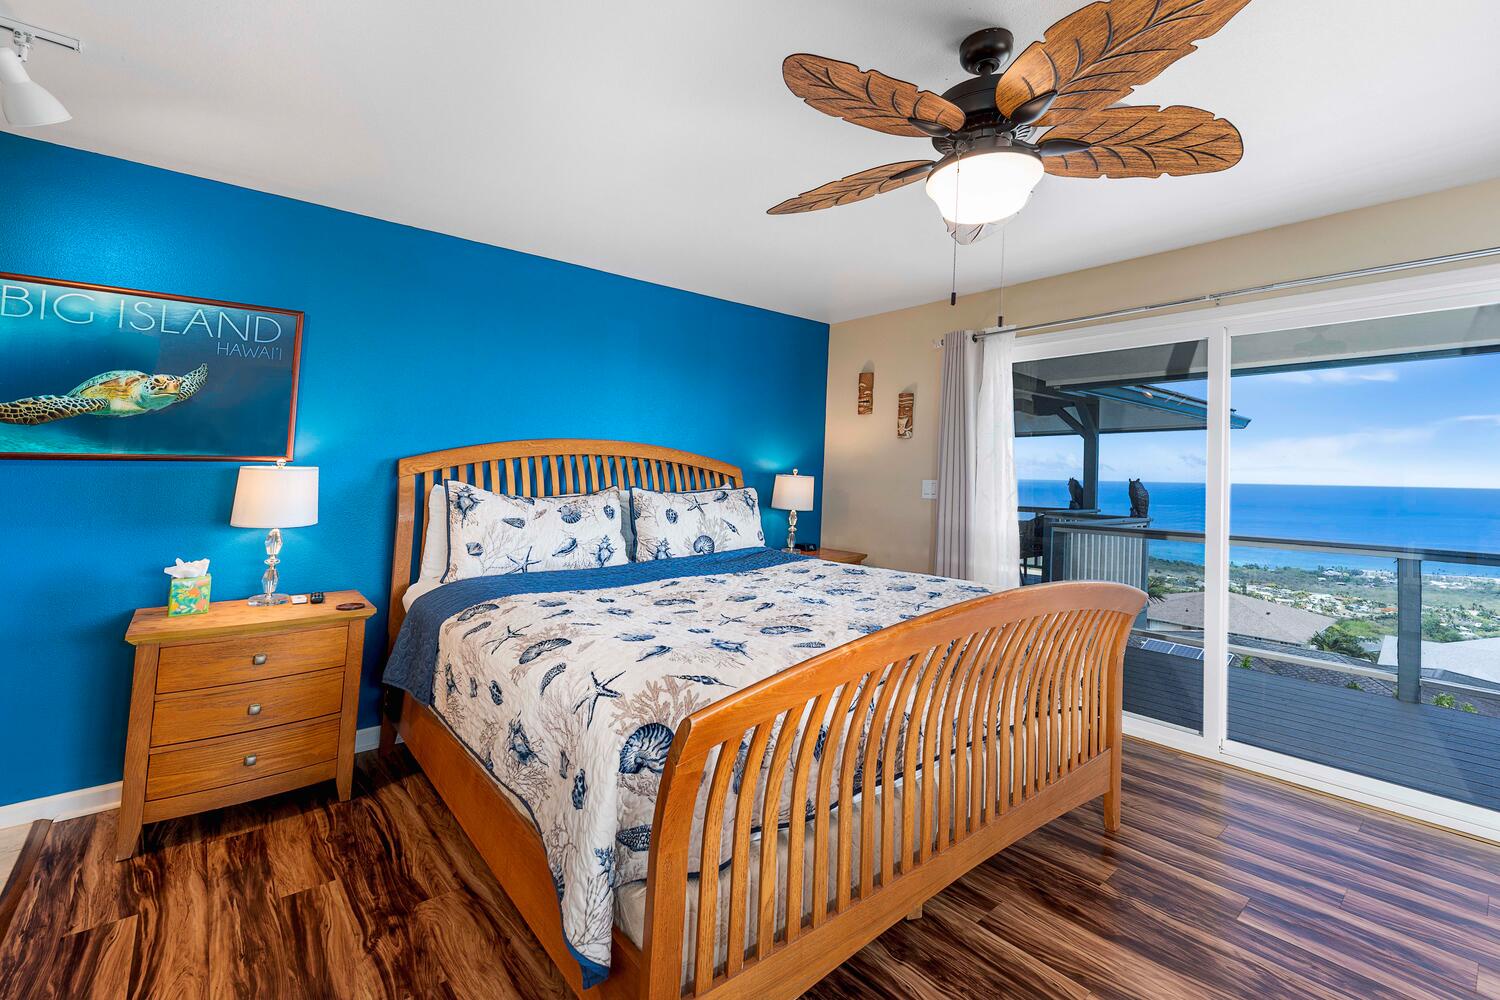 Kailua Kona Vacation Rentals, Honu O Kai (Turtle of the Sea) - The Primary Suite is located on the main living floor.